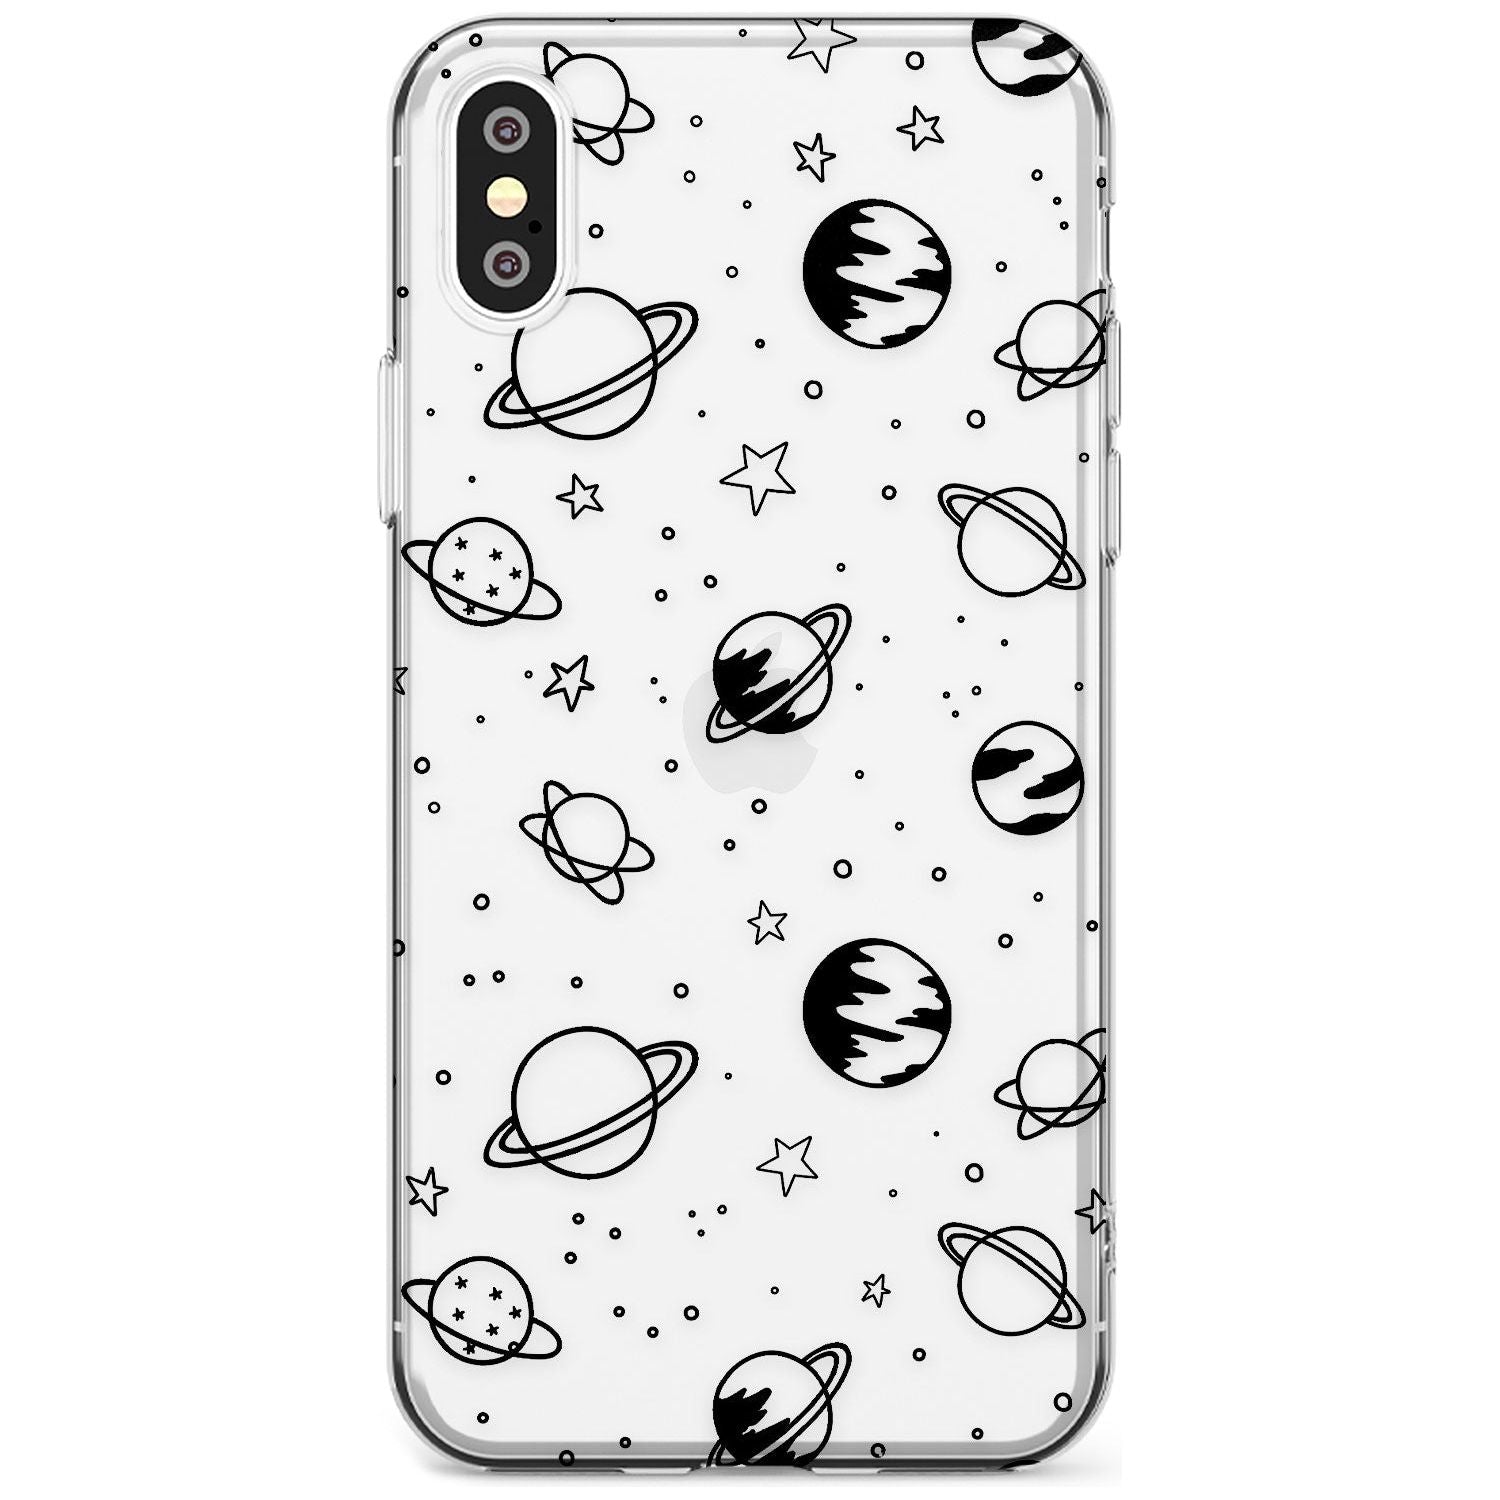 Outer Space Outlines: Black on Clear Black Impact Phone Case for iPhone X XS Max XR